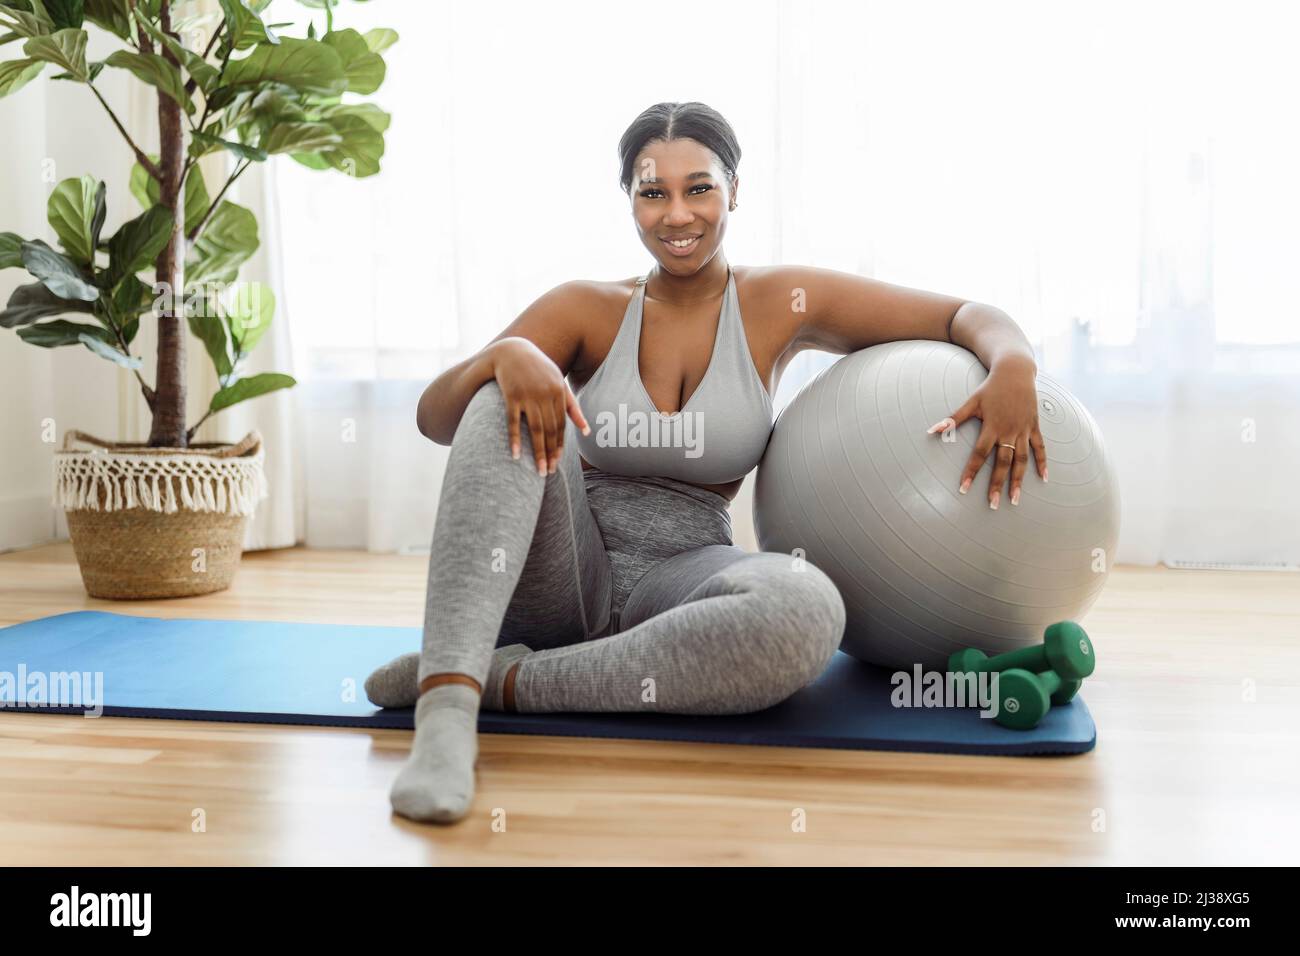 African american woman working out in home livingroom gym Stock Photo